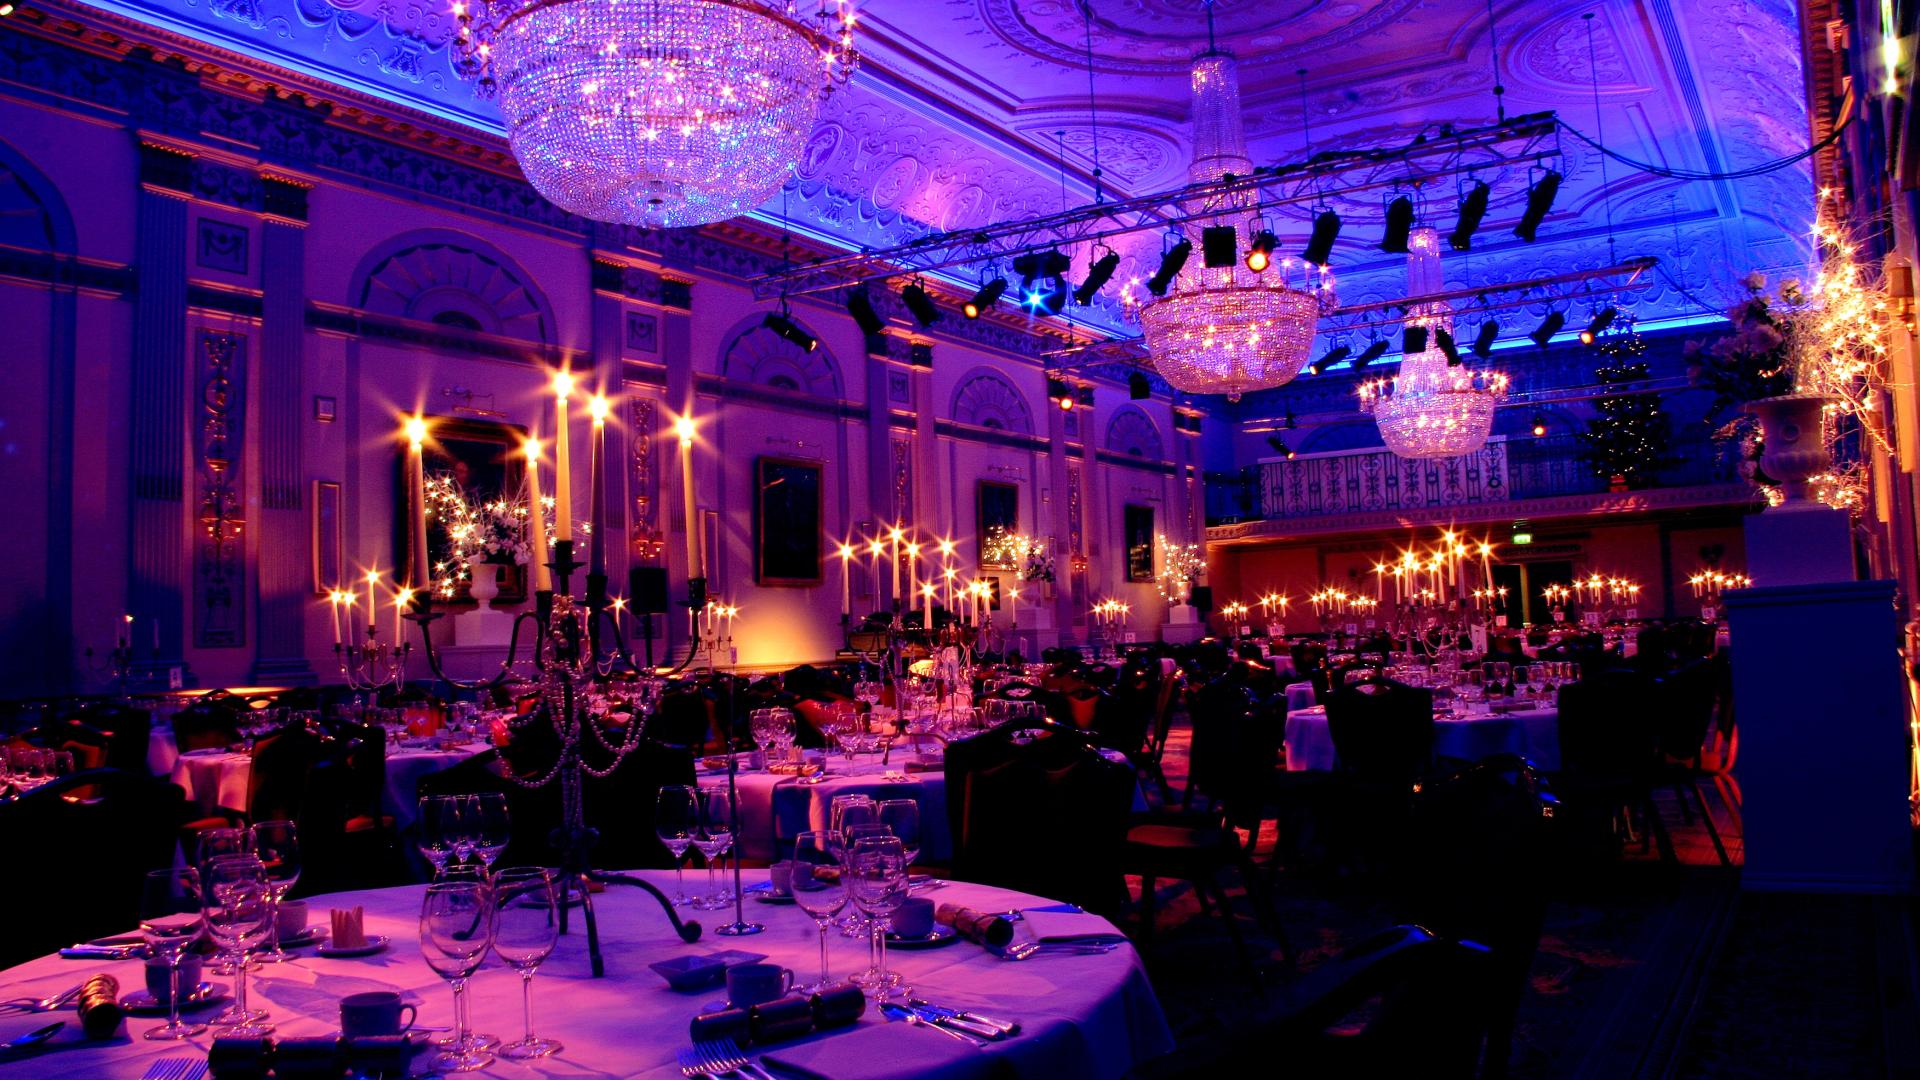 Find your Gala Dinner Venue in London